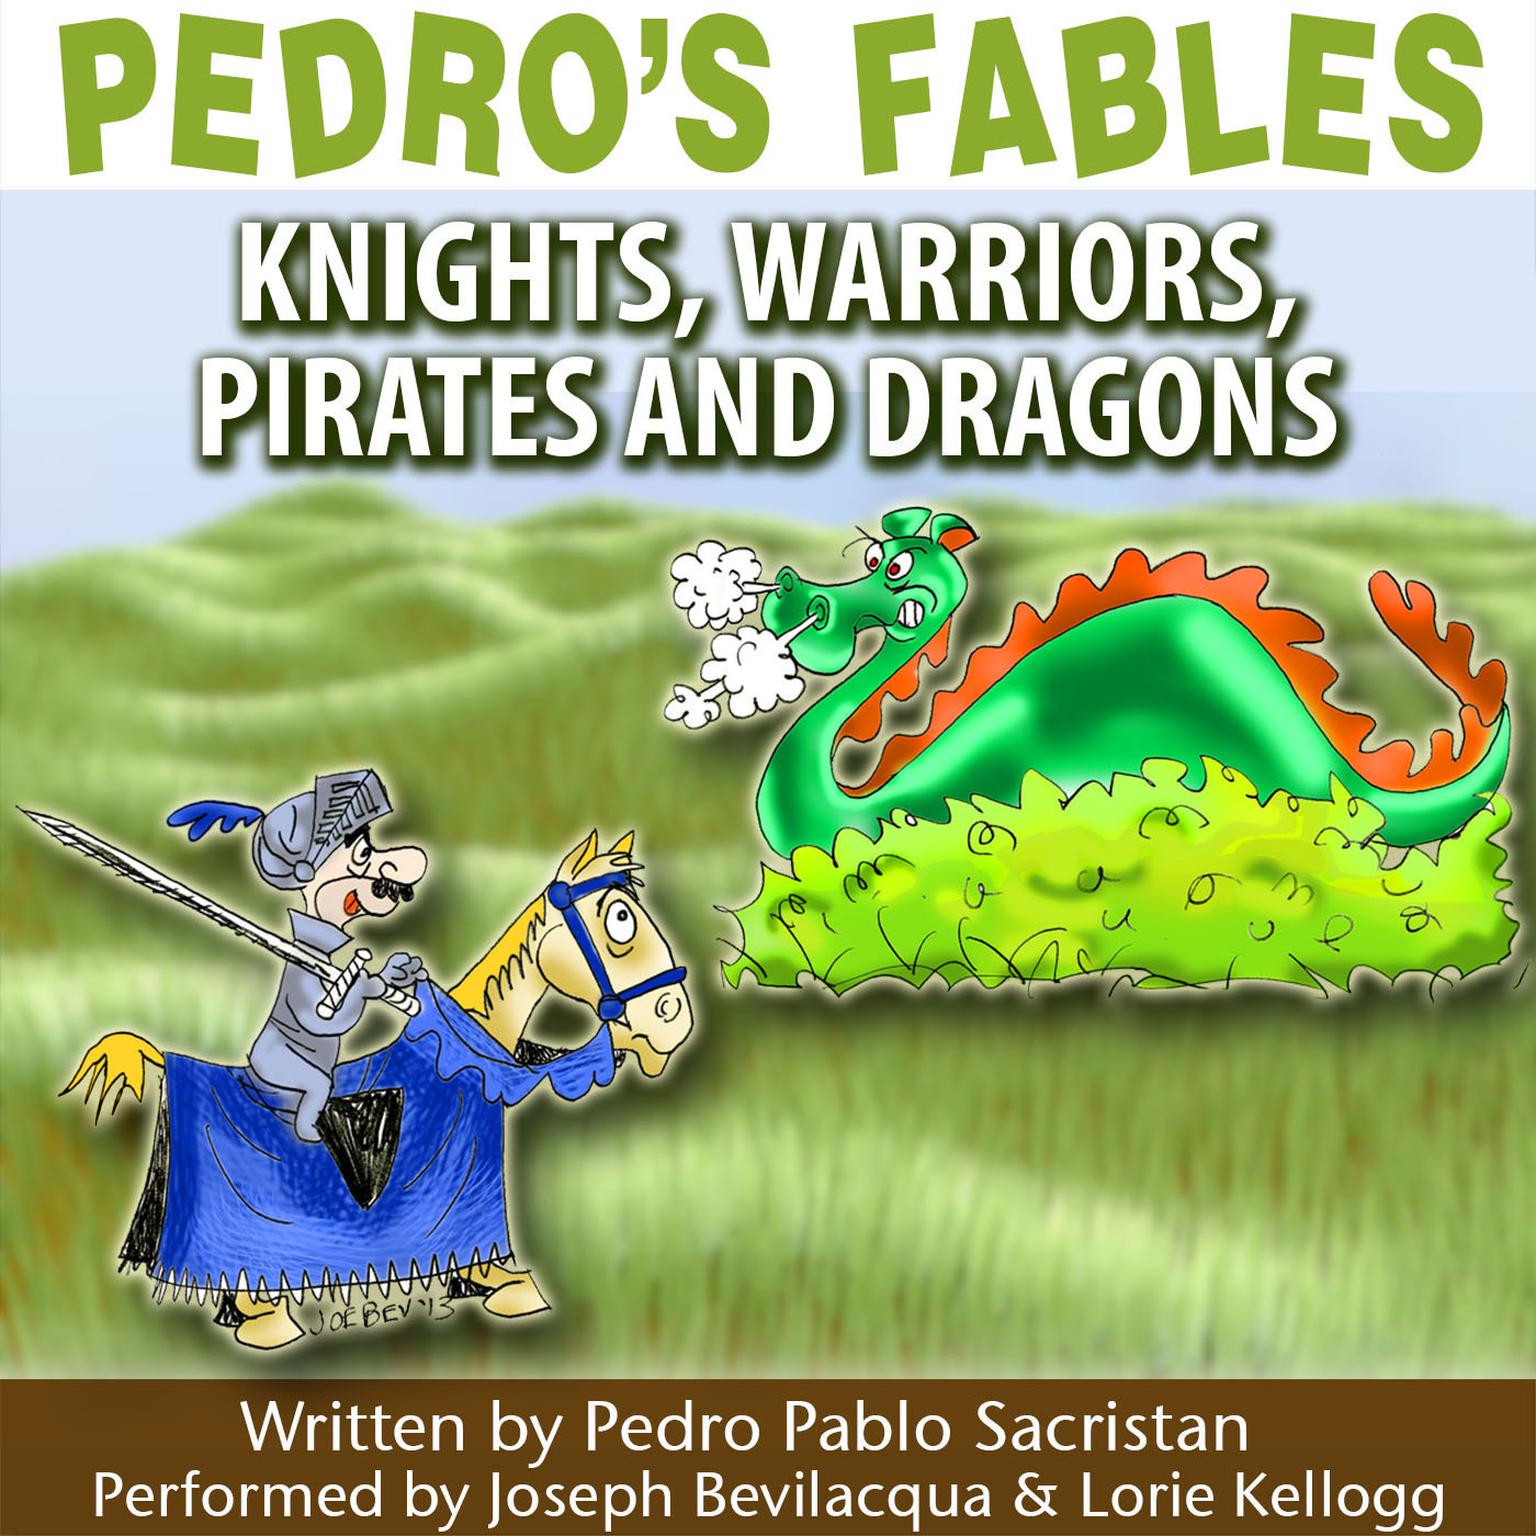 Pedro’s Fables: Knights, Warriors, Pirates, and Dragons Audiobook, by Pedro Pablo Sacristán